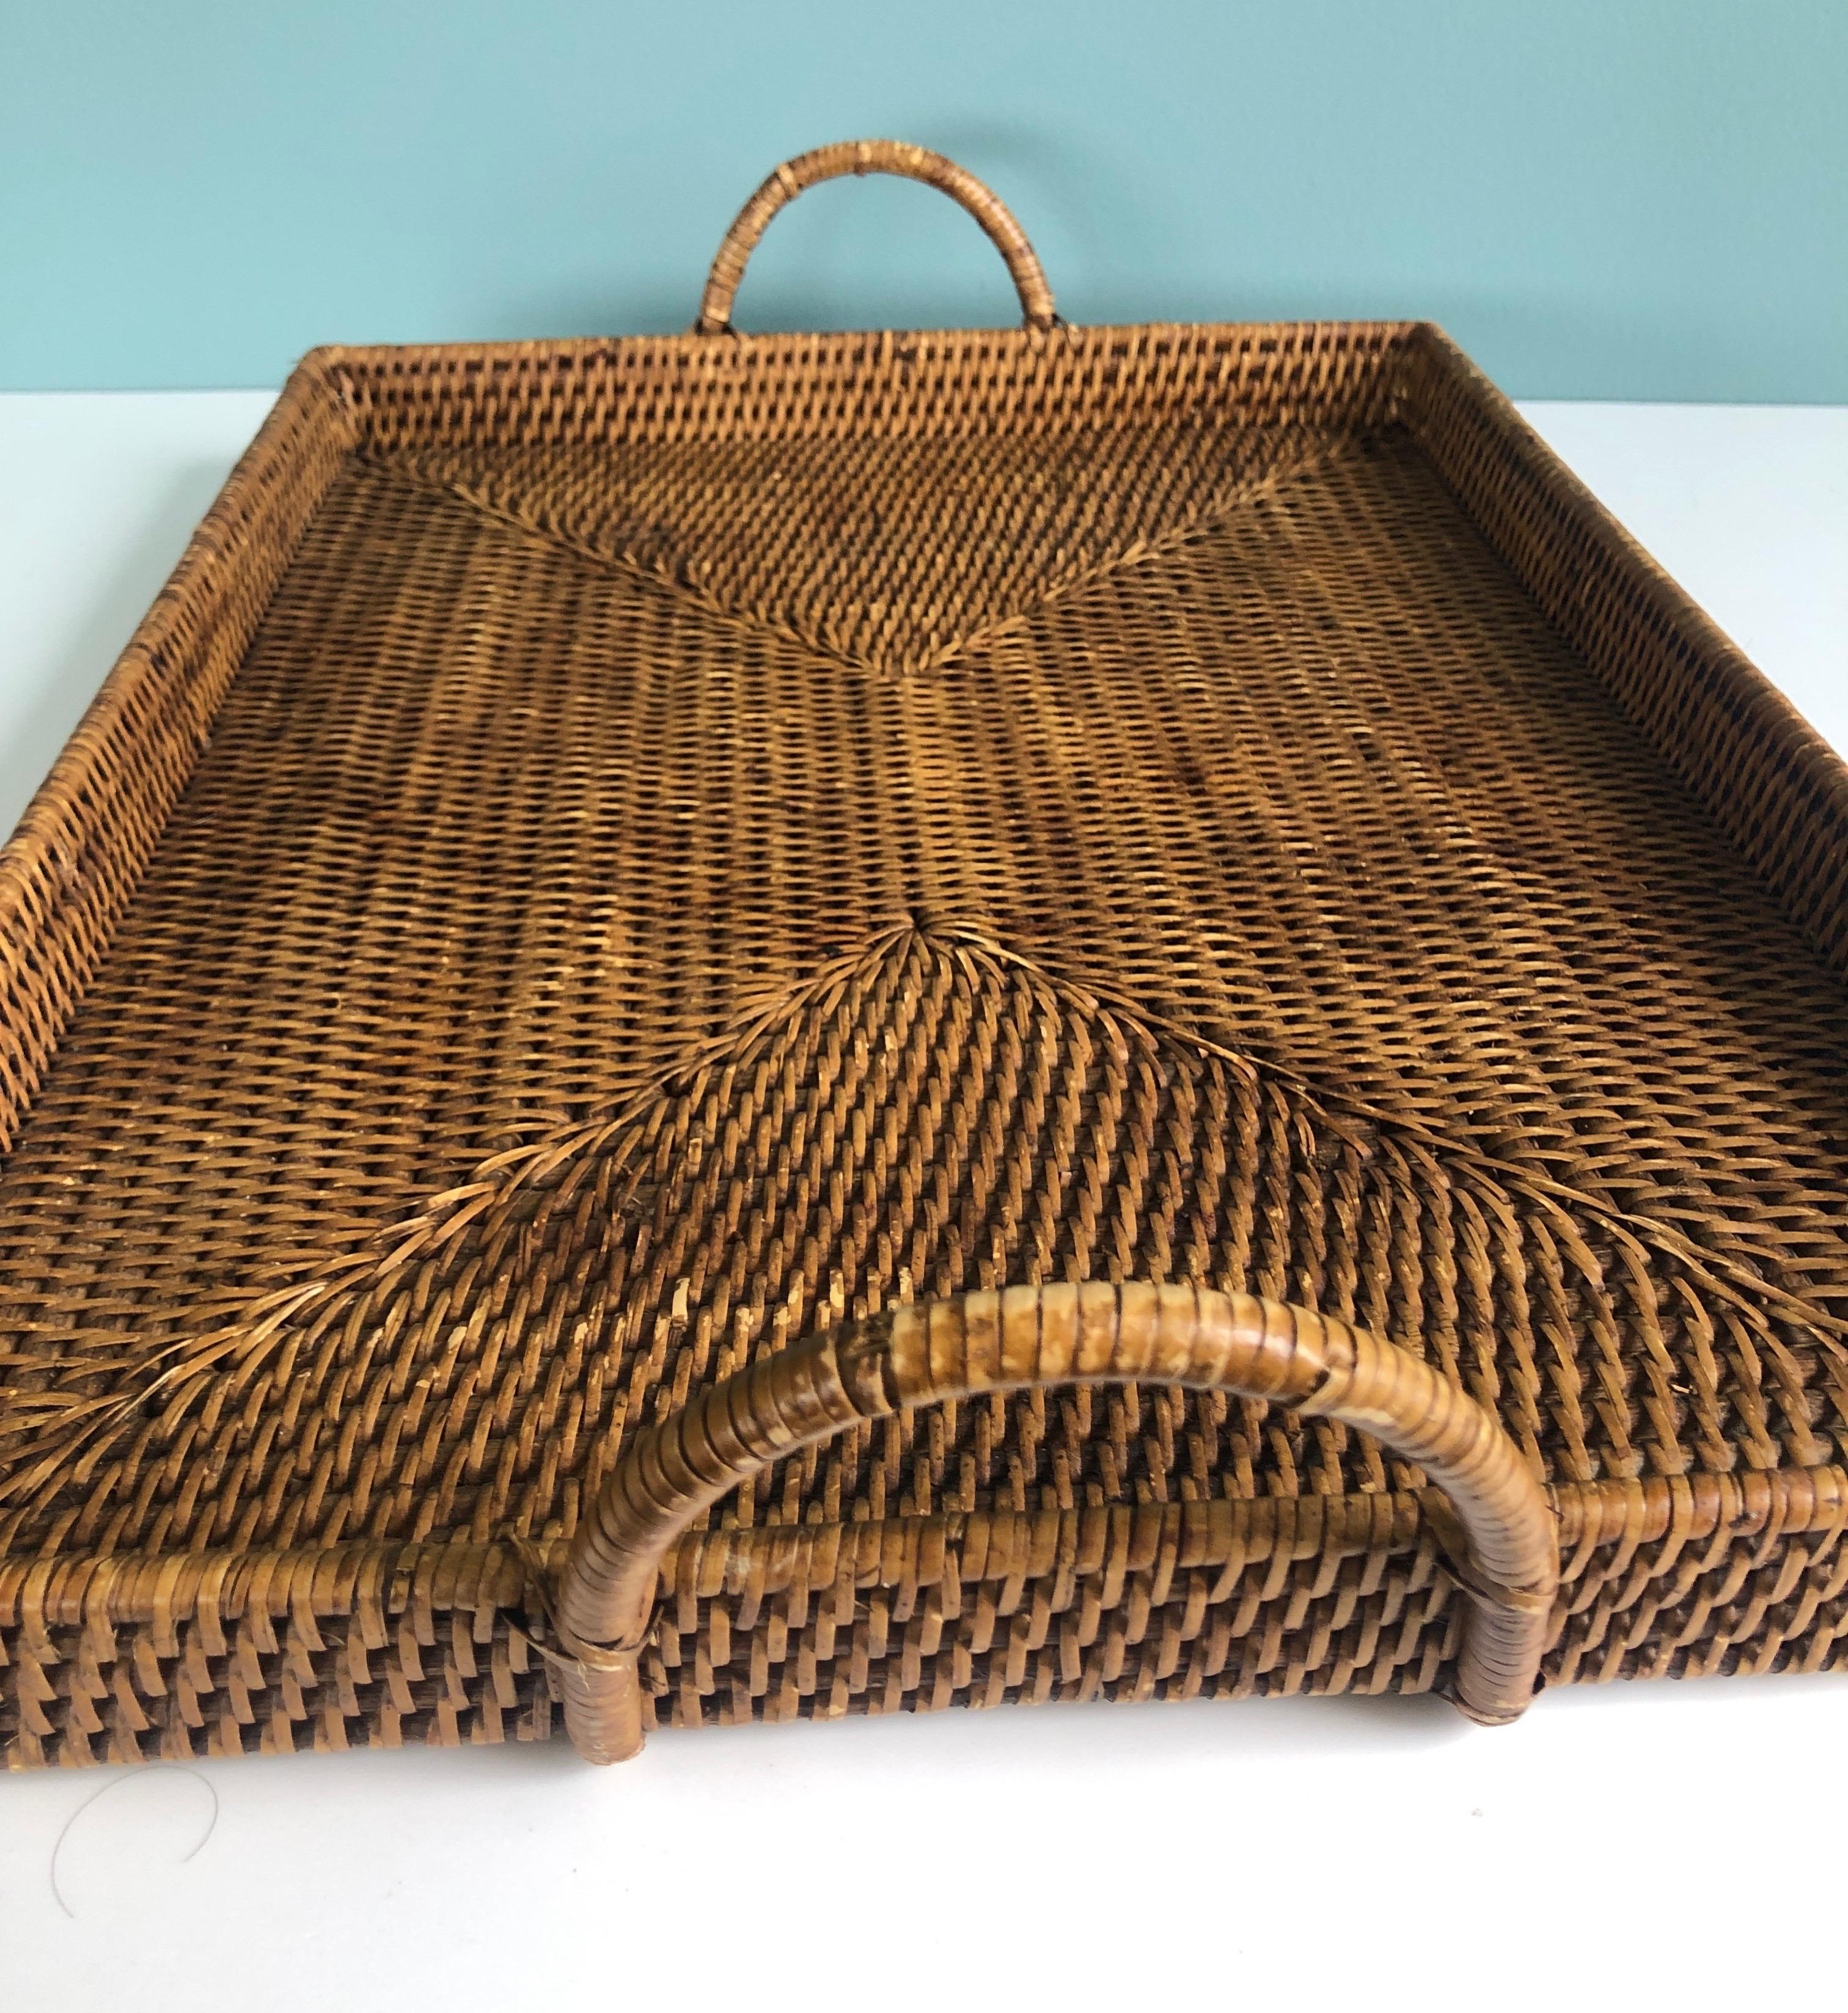 Indonesian Large Woven Rattan Serving Tray with Handles